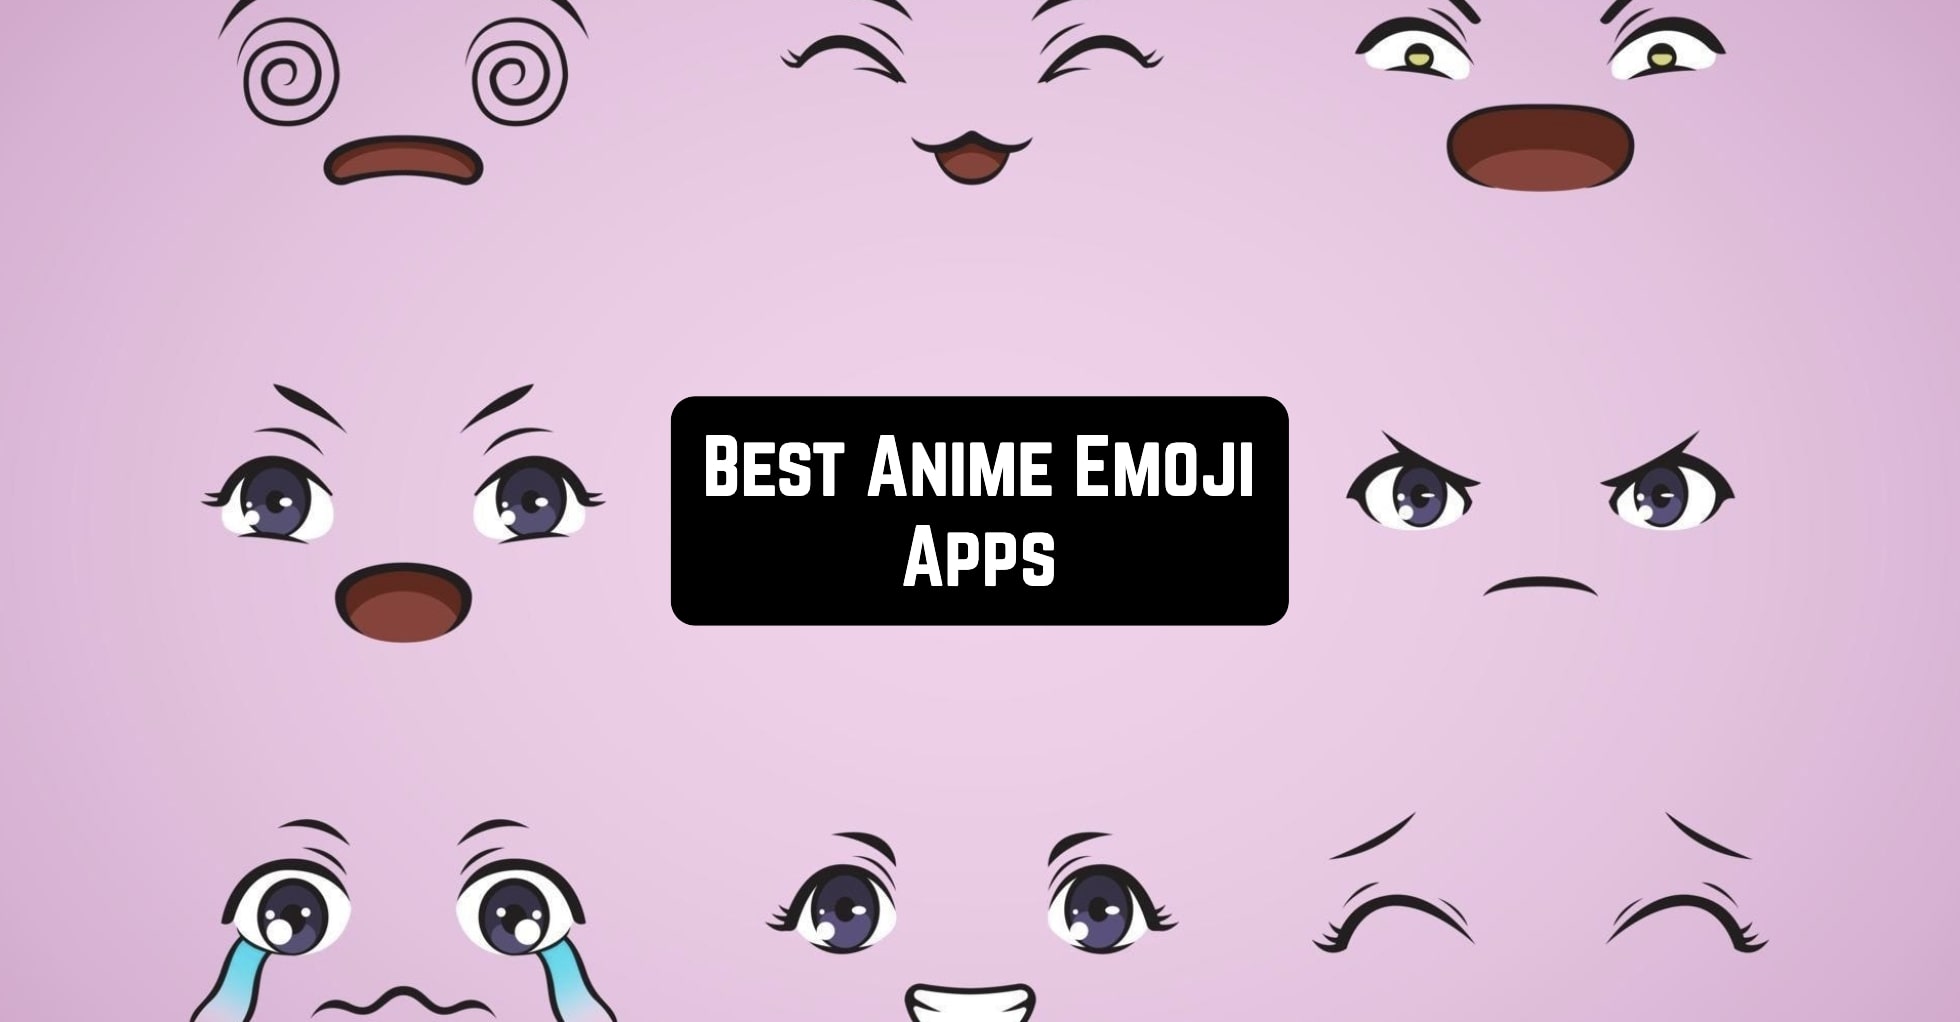 7 Best Anime Emoji Apps for Android & iOS | Free apps for Android and iOS